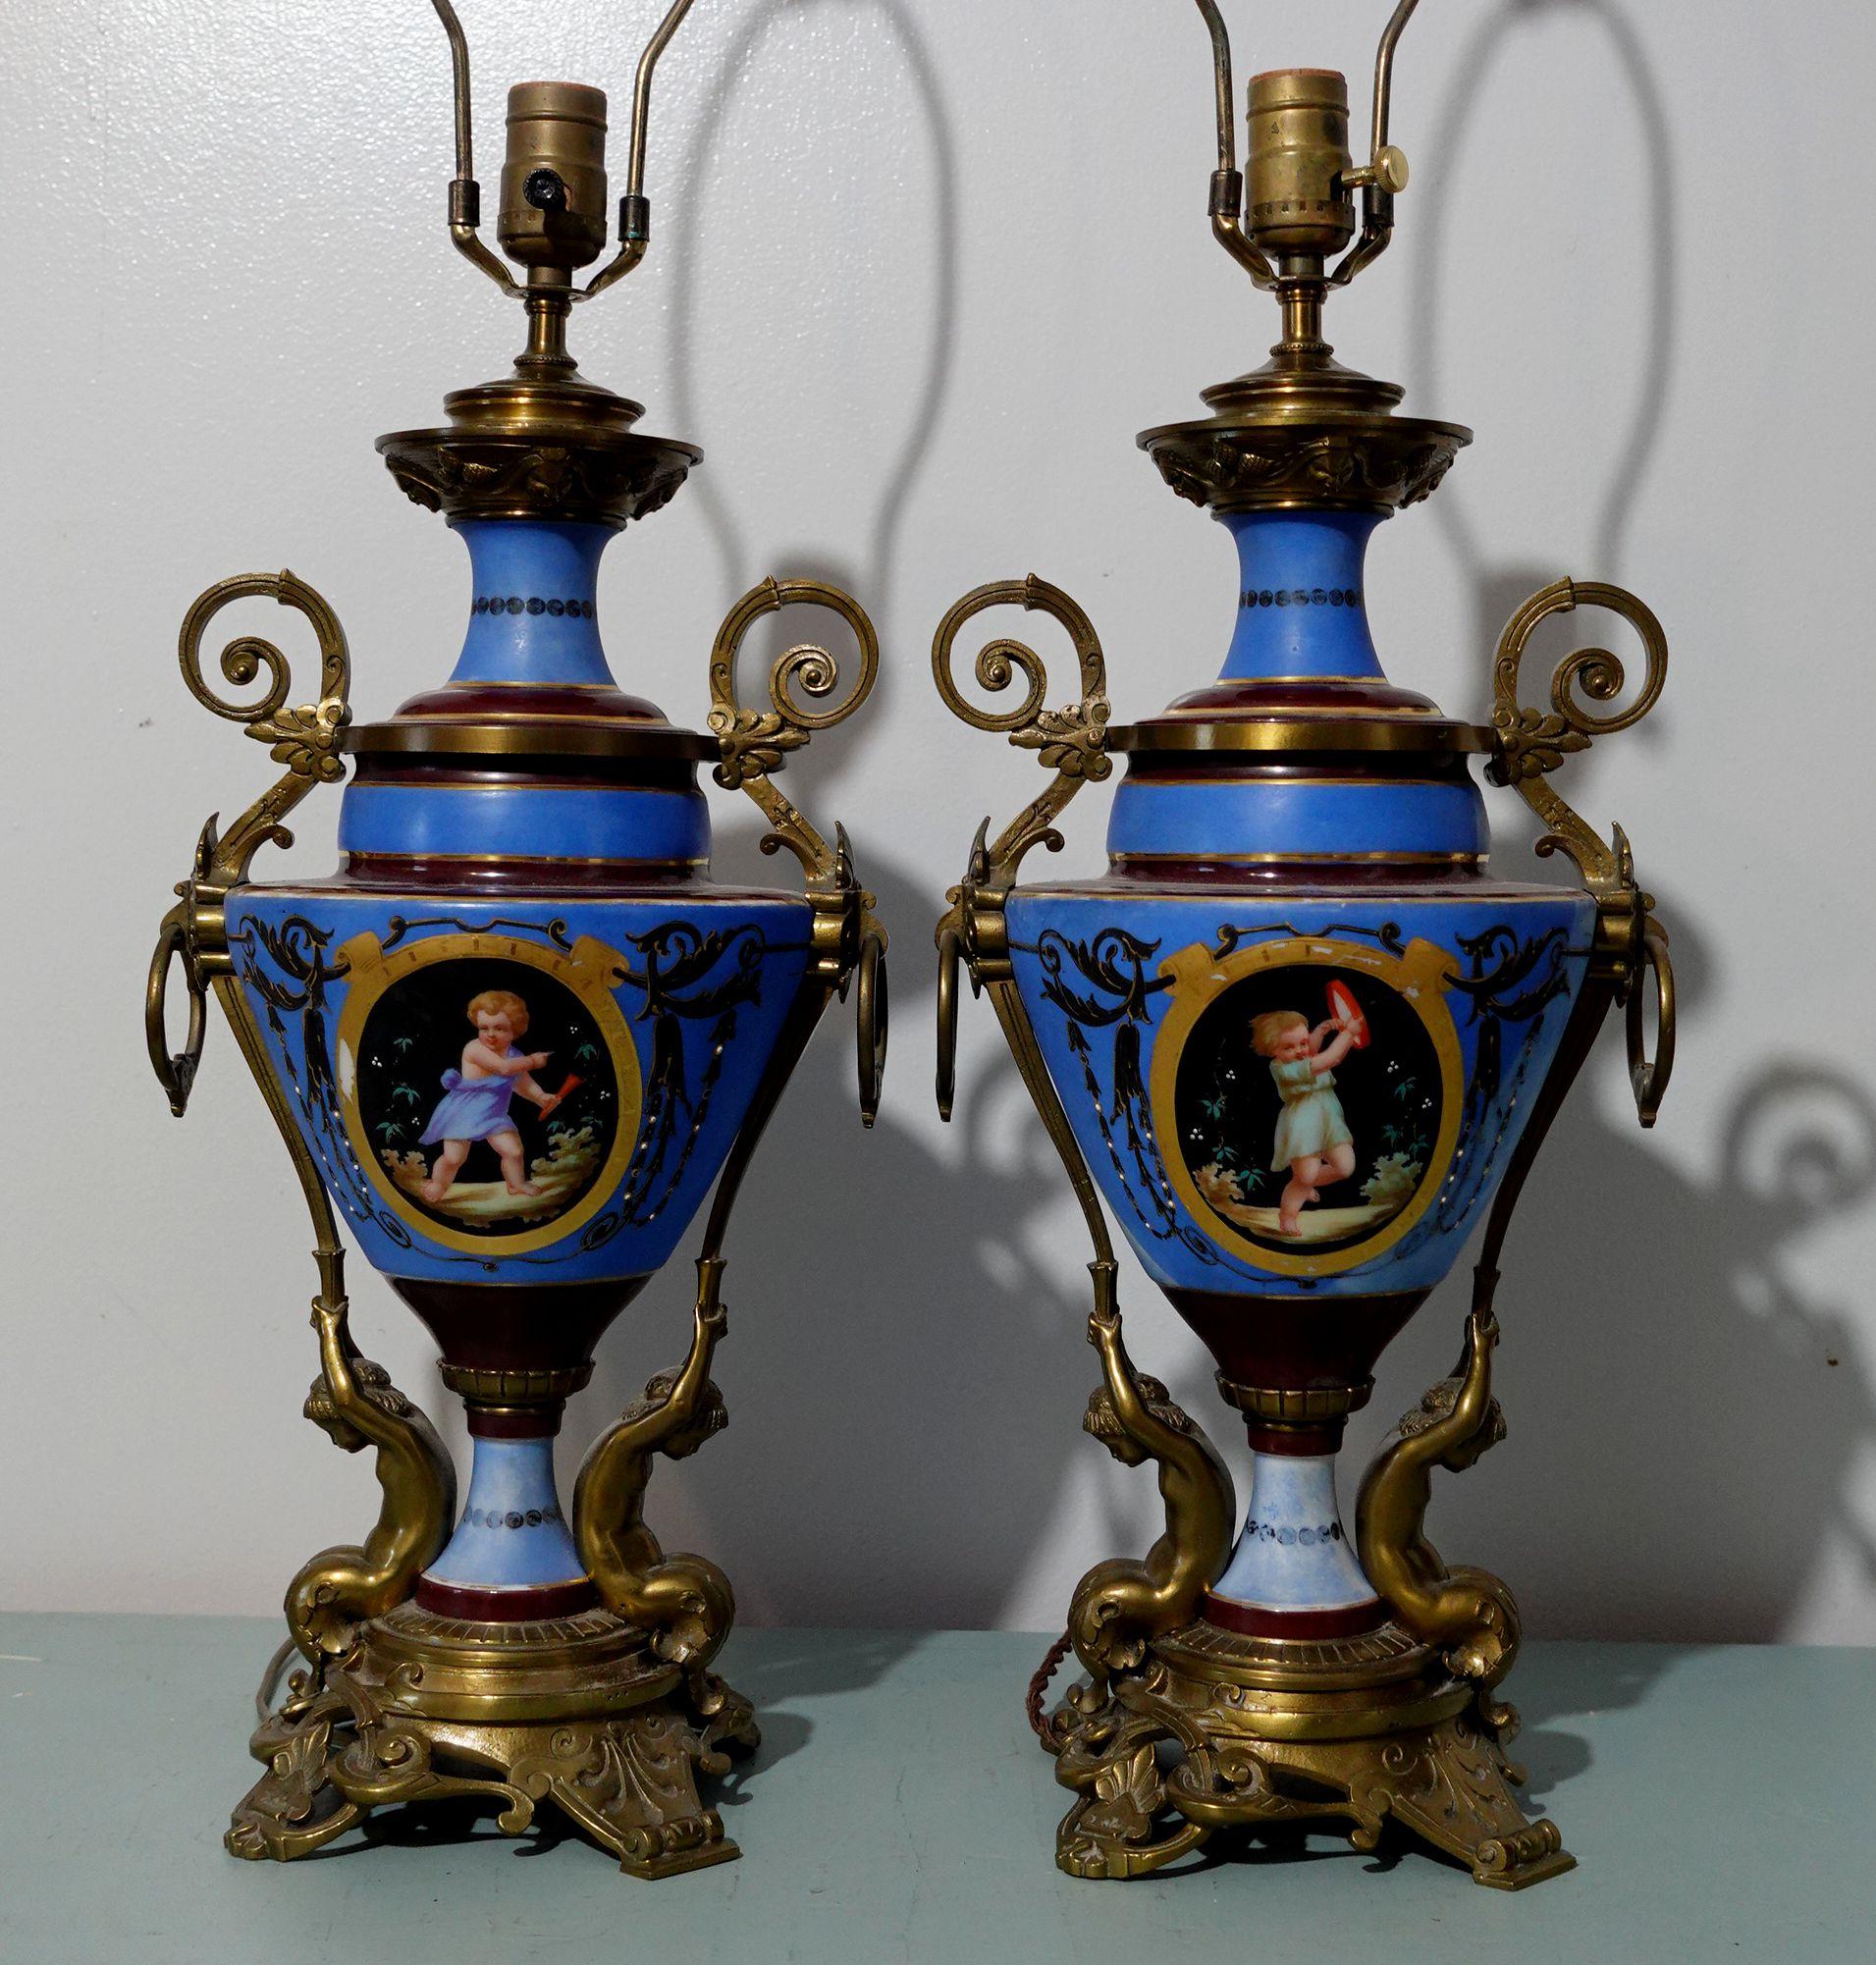 Pair of Neoclassical Style Porcelain and Gilt-Bronze Table Lamps For Sale 9